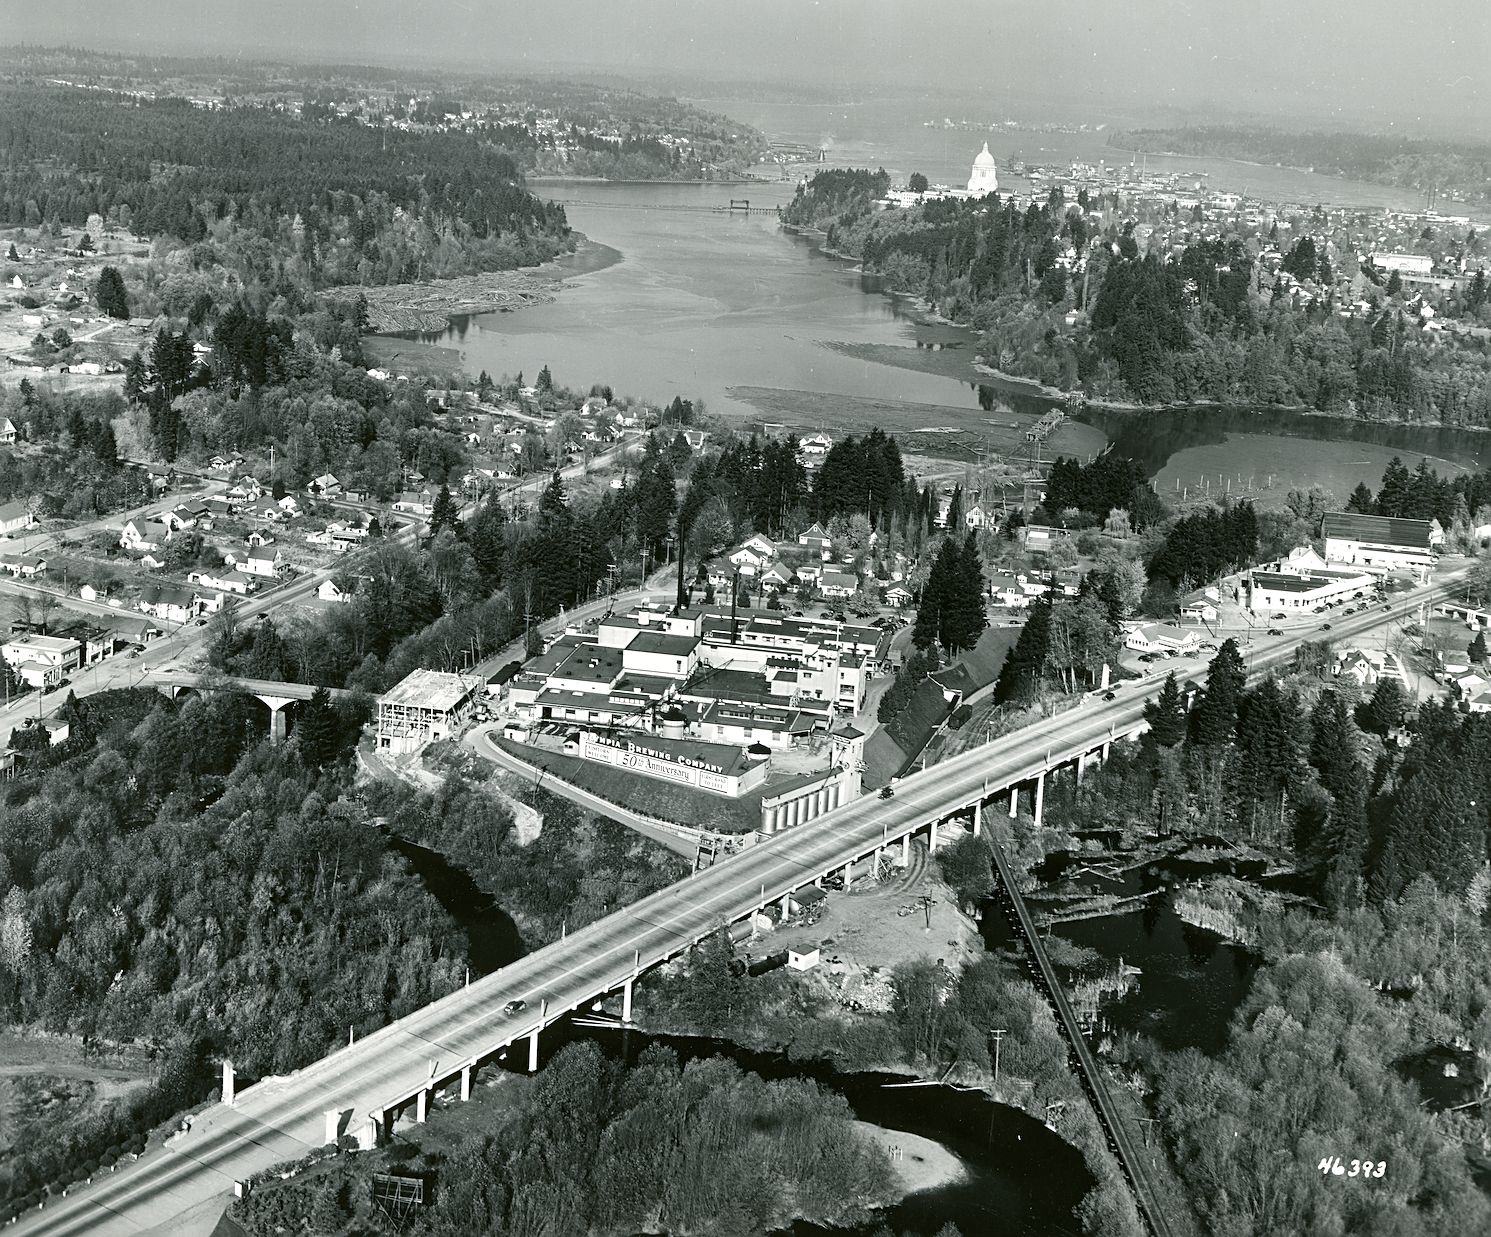 olympia-history-Highway-99-Aerial-View-tumwater-1946.